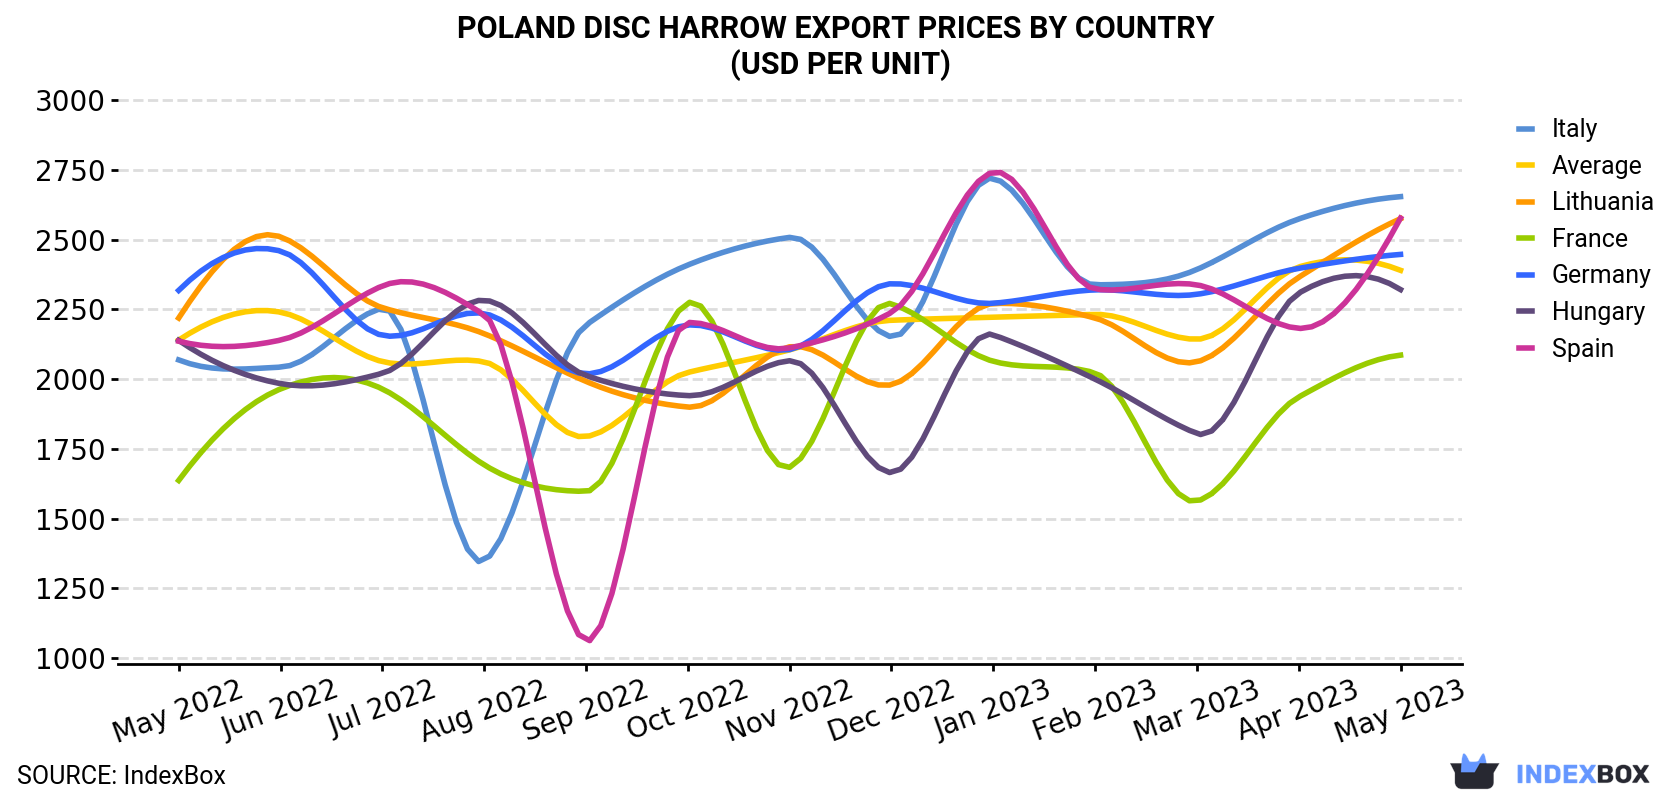 Poland Disc Harrow Export Prices By Country (USD Per Unit)